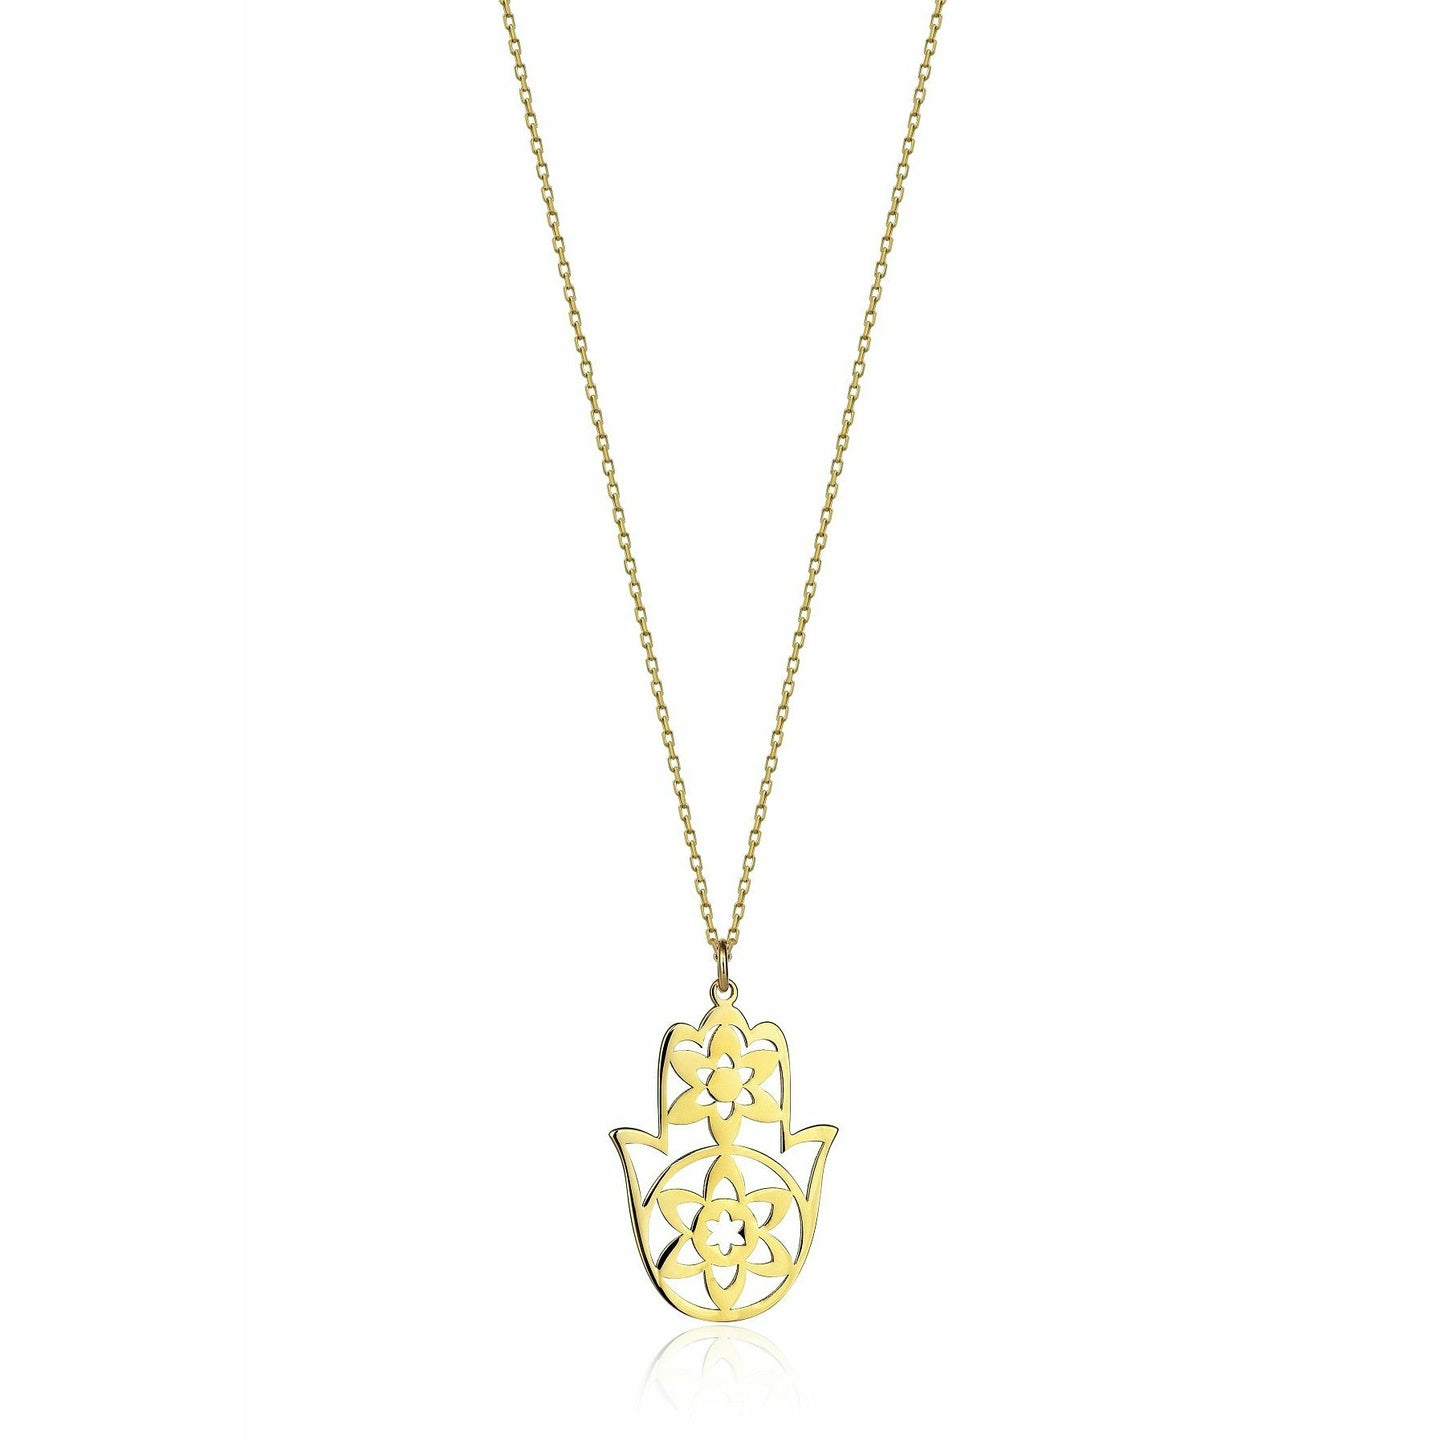 Special Design Gift 14k Gold Fatman's Hand Necklace